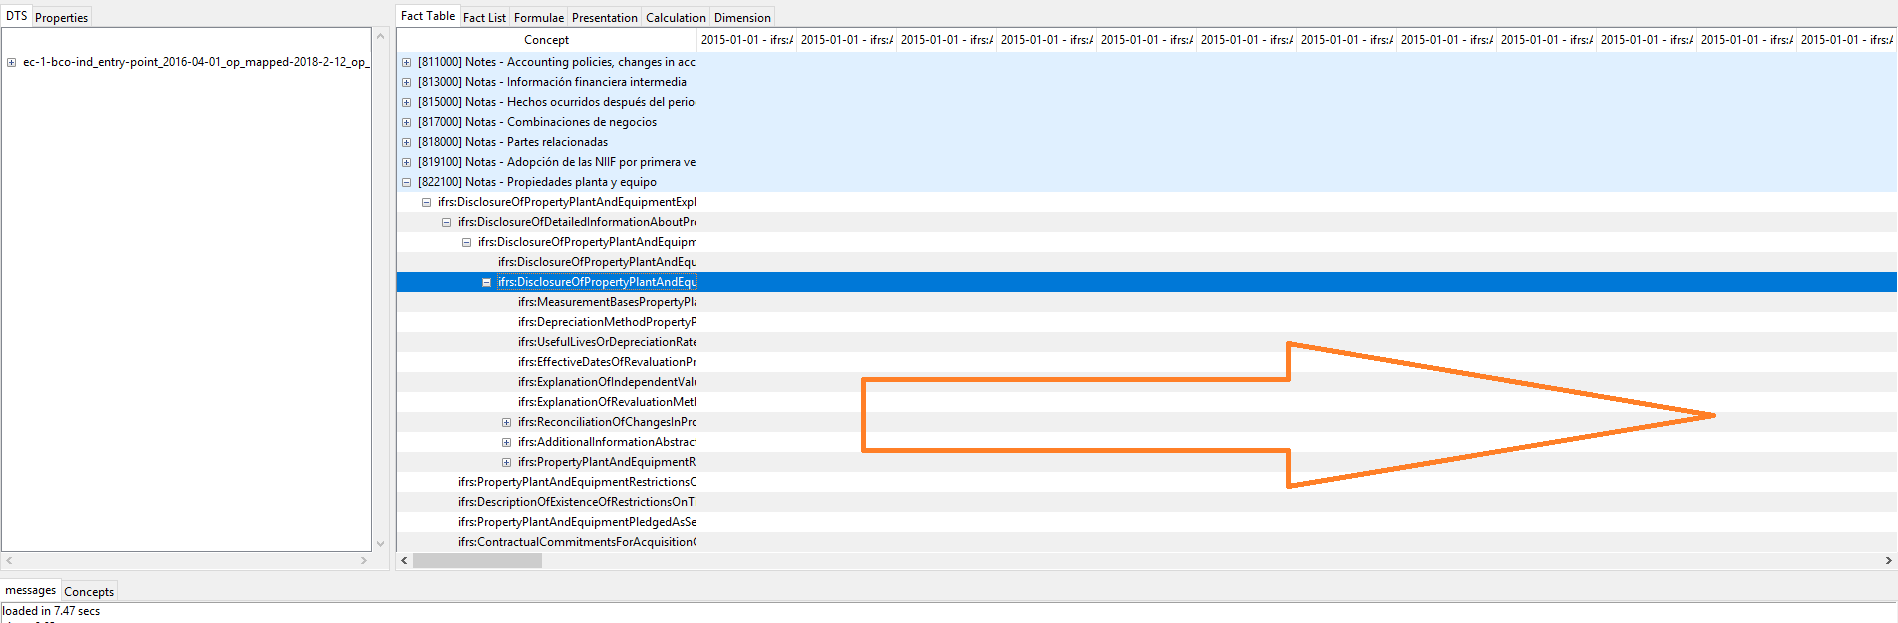 xbrl instance document in arelle